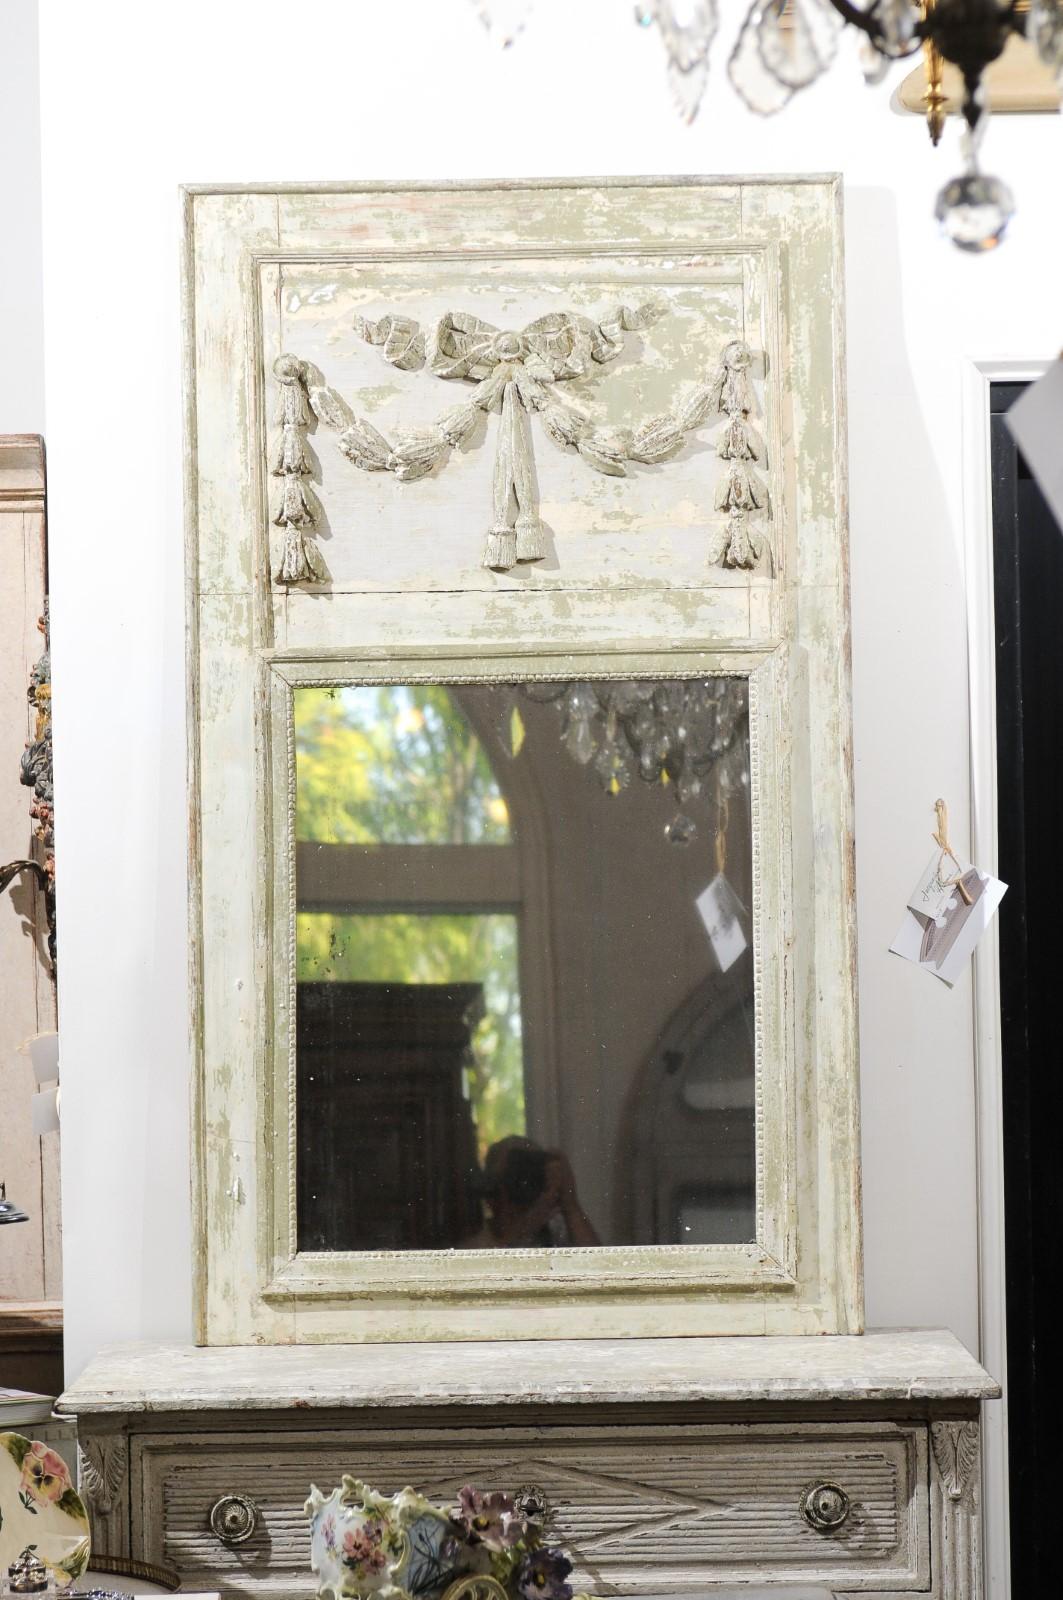 A French Louis XVI period painted wood trumeau mirror from the late 18th century, with ribbon-tied garlands and distressed finish. Born in France during the reign of King Louis XVI, this exquisite painted trumeau mirror is adorned in its upper